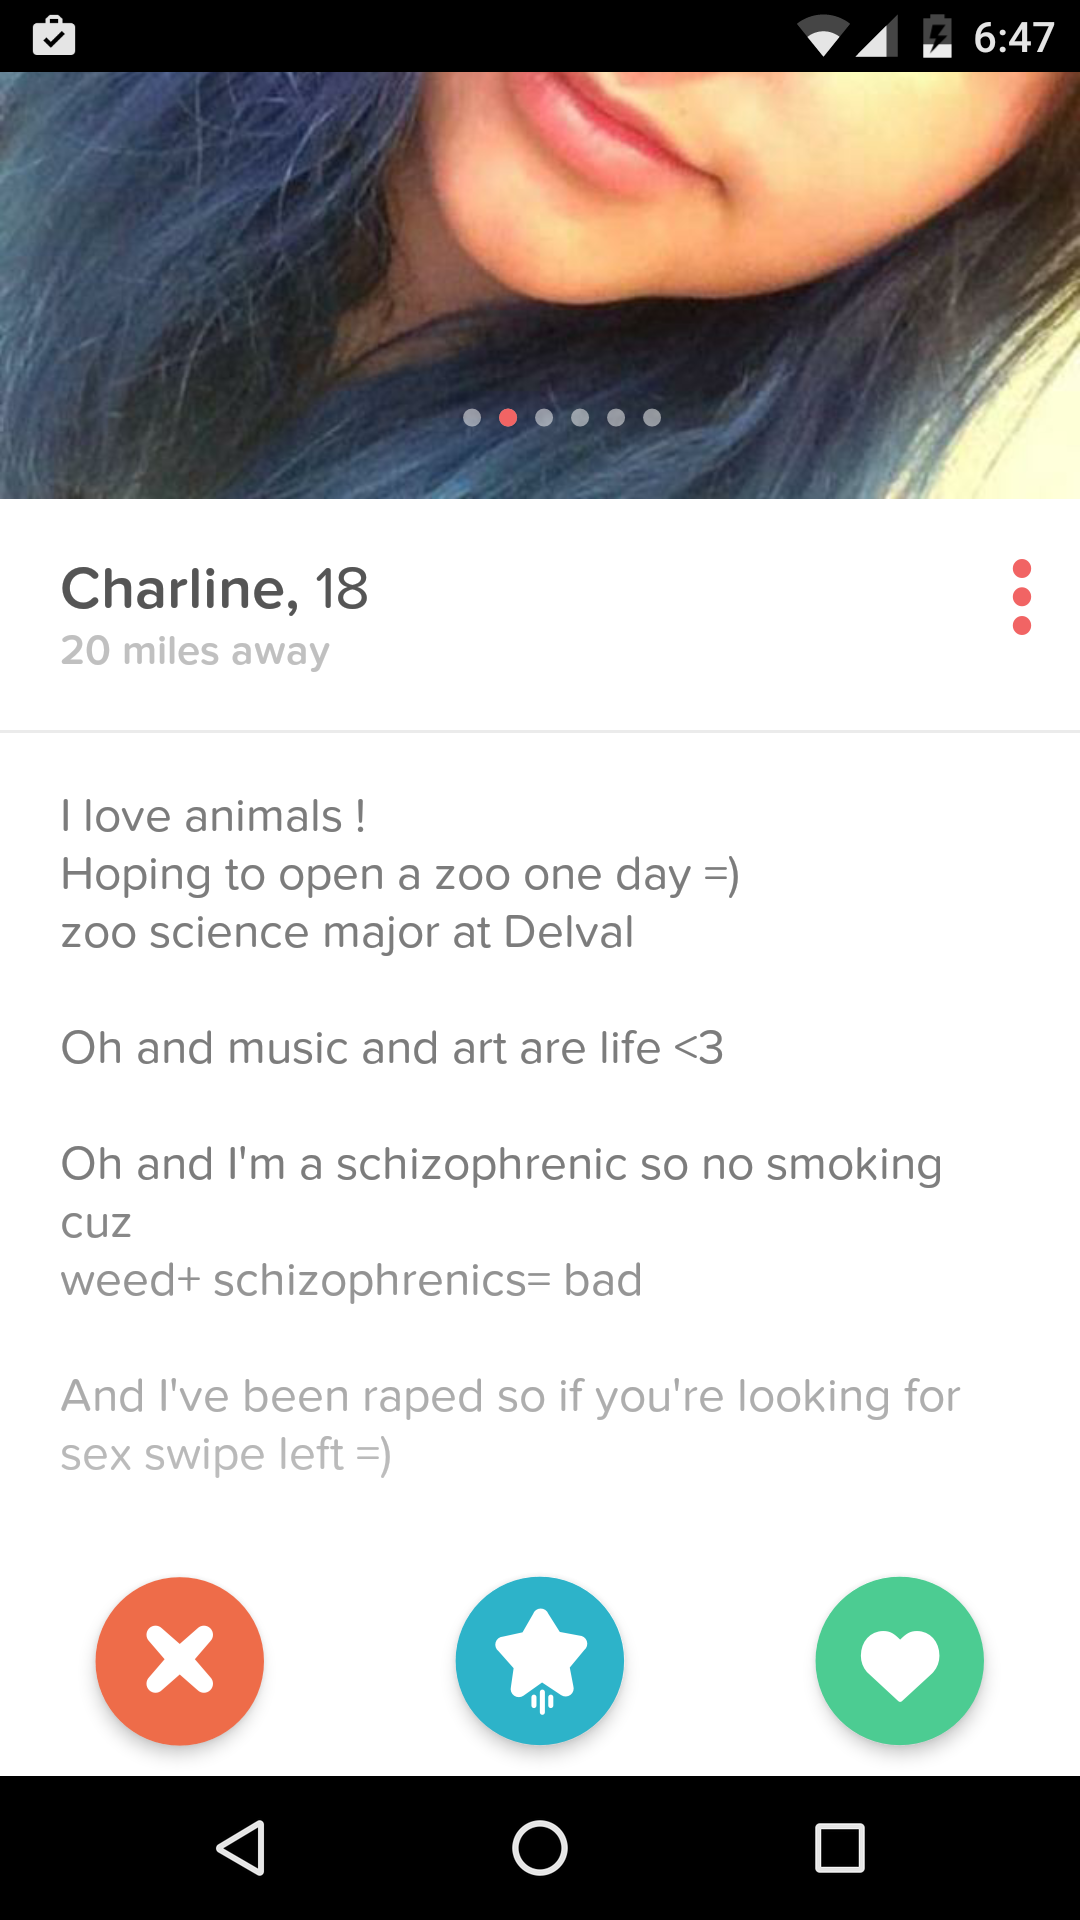 reddit dirtyr4r - Charline, 18 20 miles away I love animals! Hoping to open a zoo one day zoo science major at Delval Oh and music and art are life